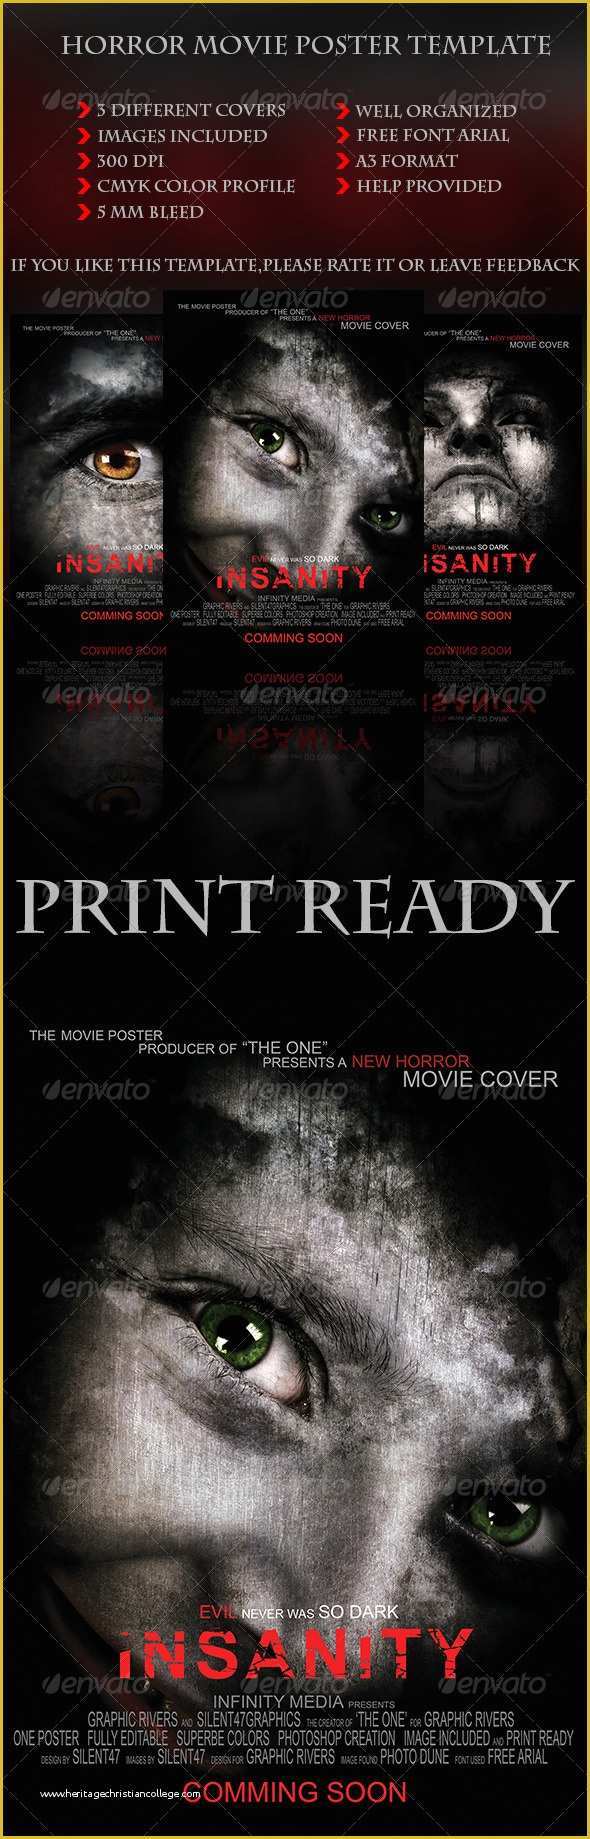 Free Movie Poster Template Of Horror Movie Poster Template by Silentgraphics